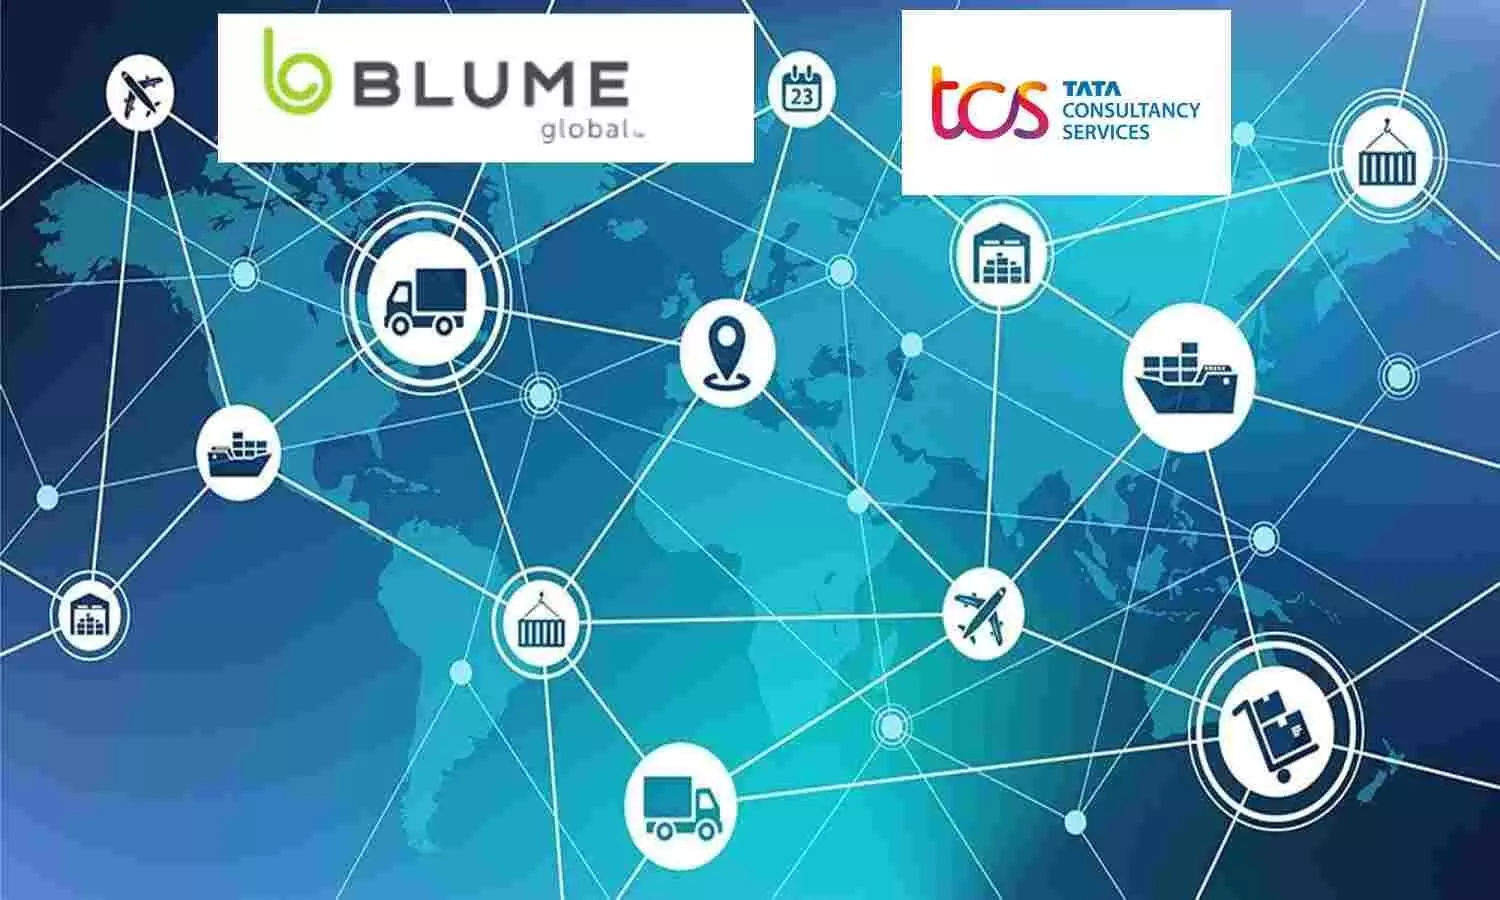 TCS will leverage Blume Global’s digital solutions to help customers drive transformation